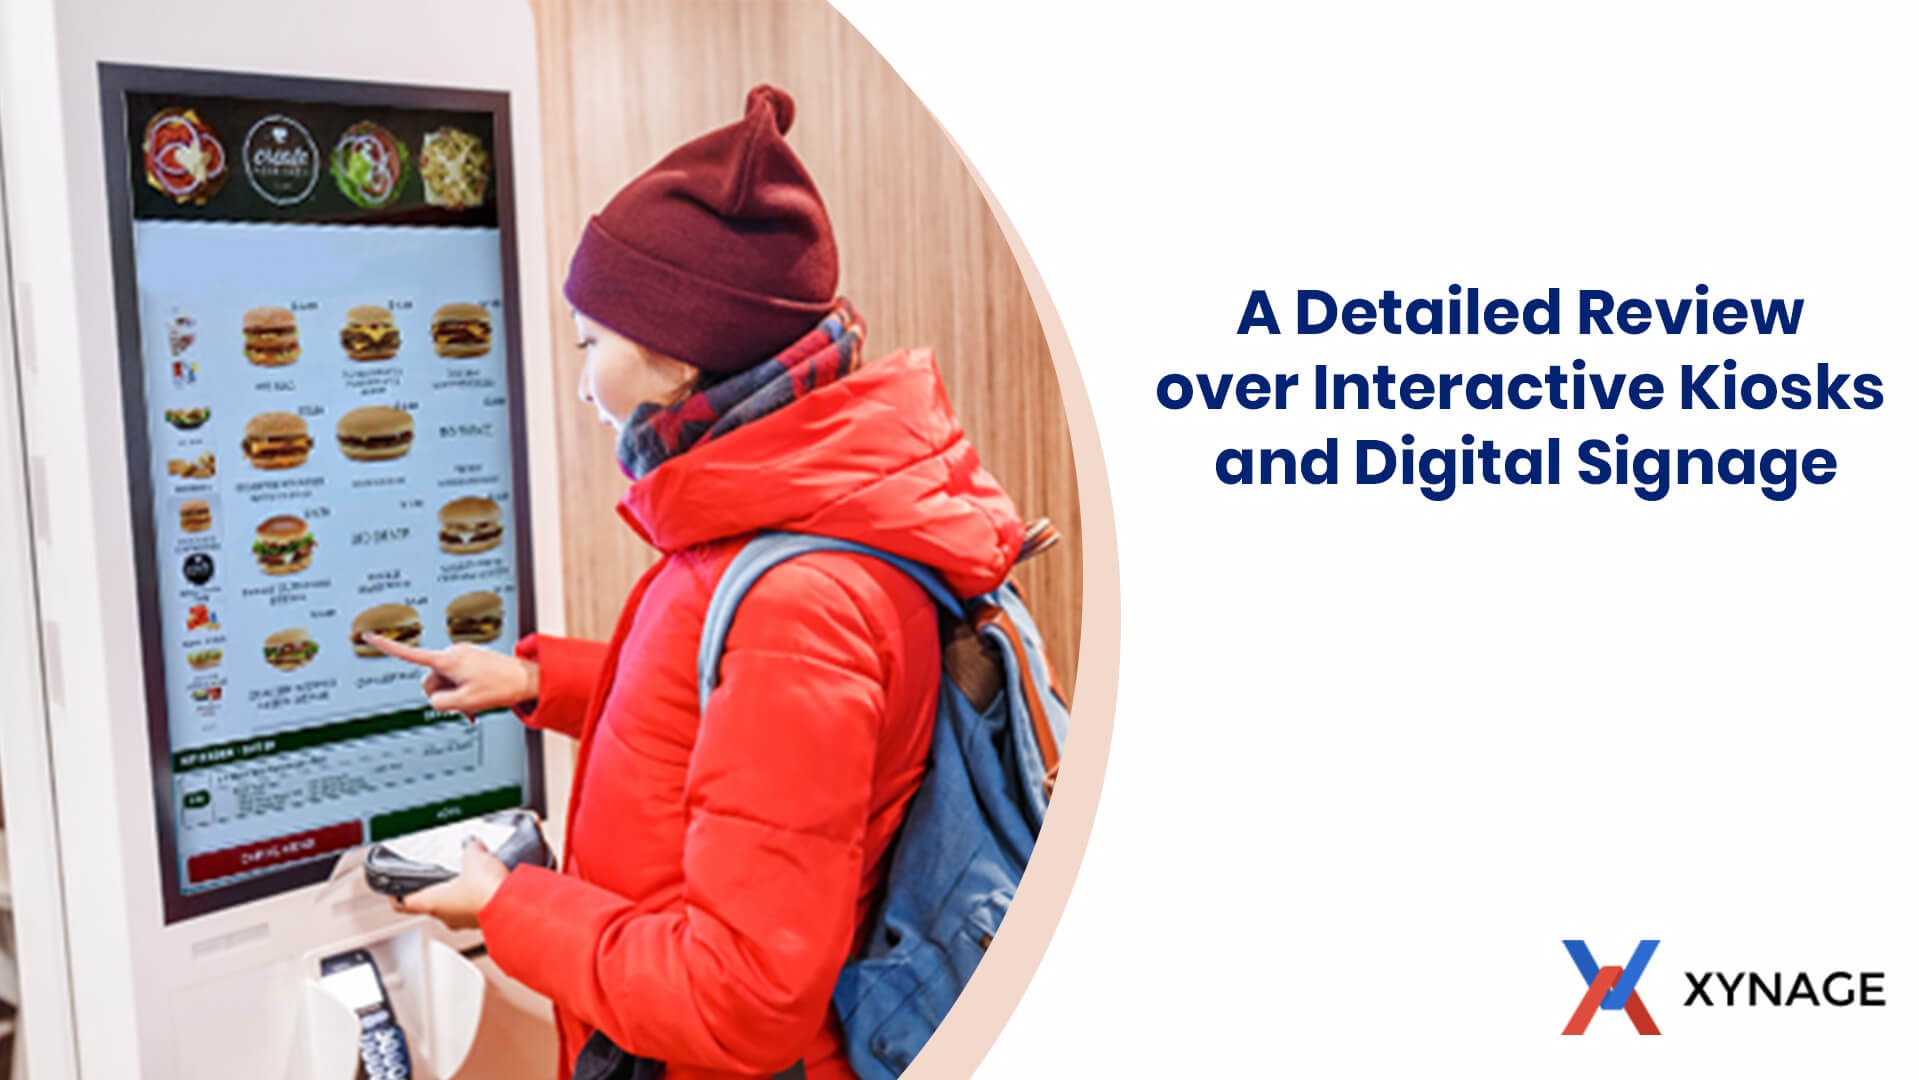 A Detailed Review over Interactive Kiosks and Digital Signage